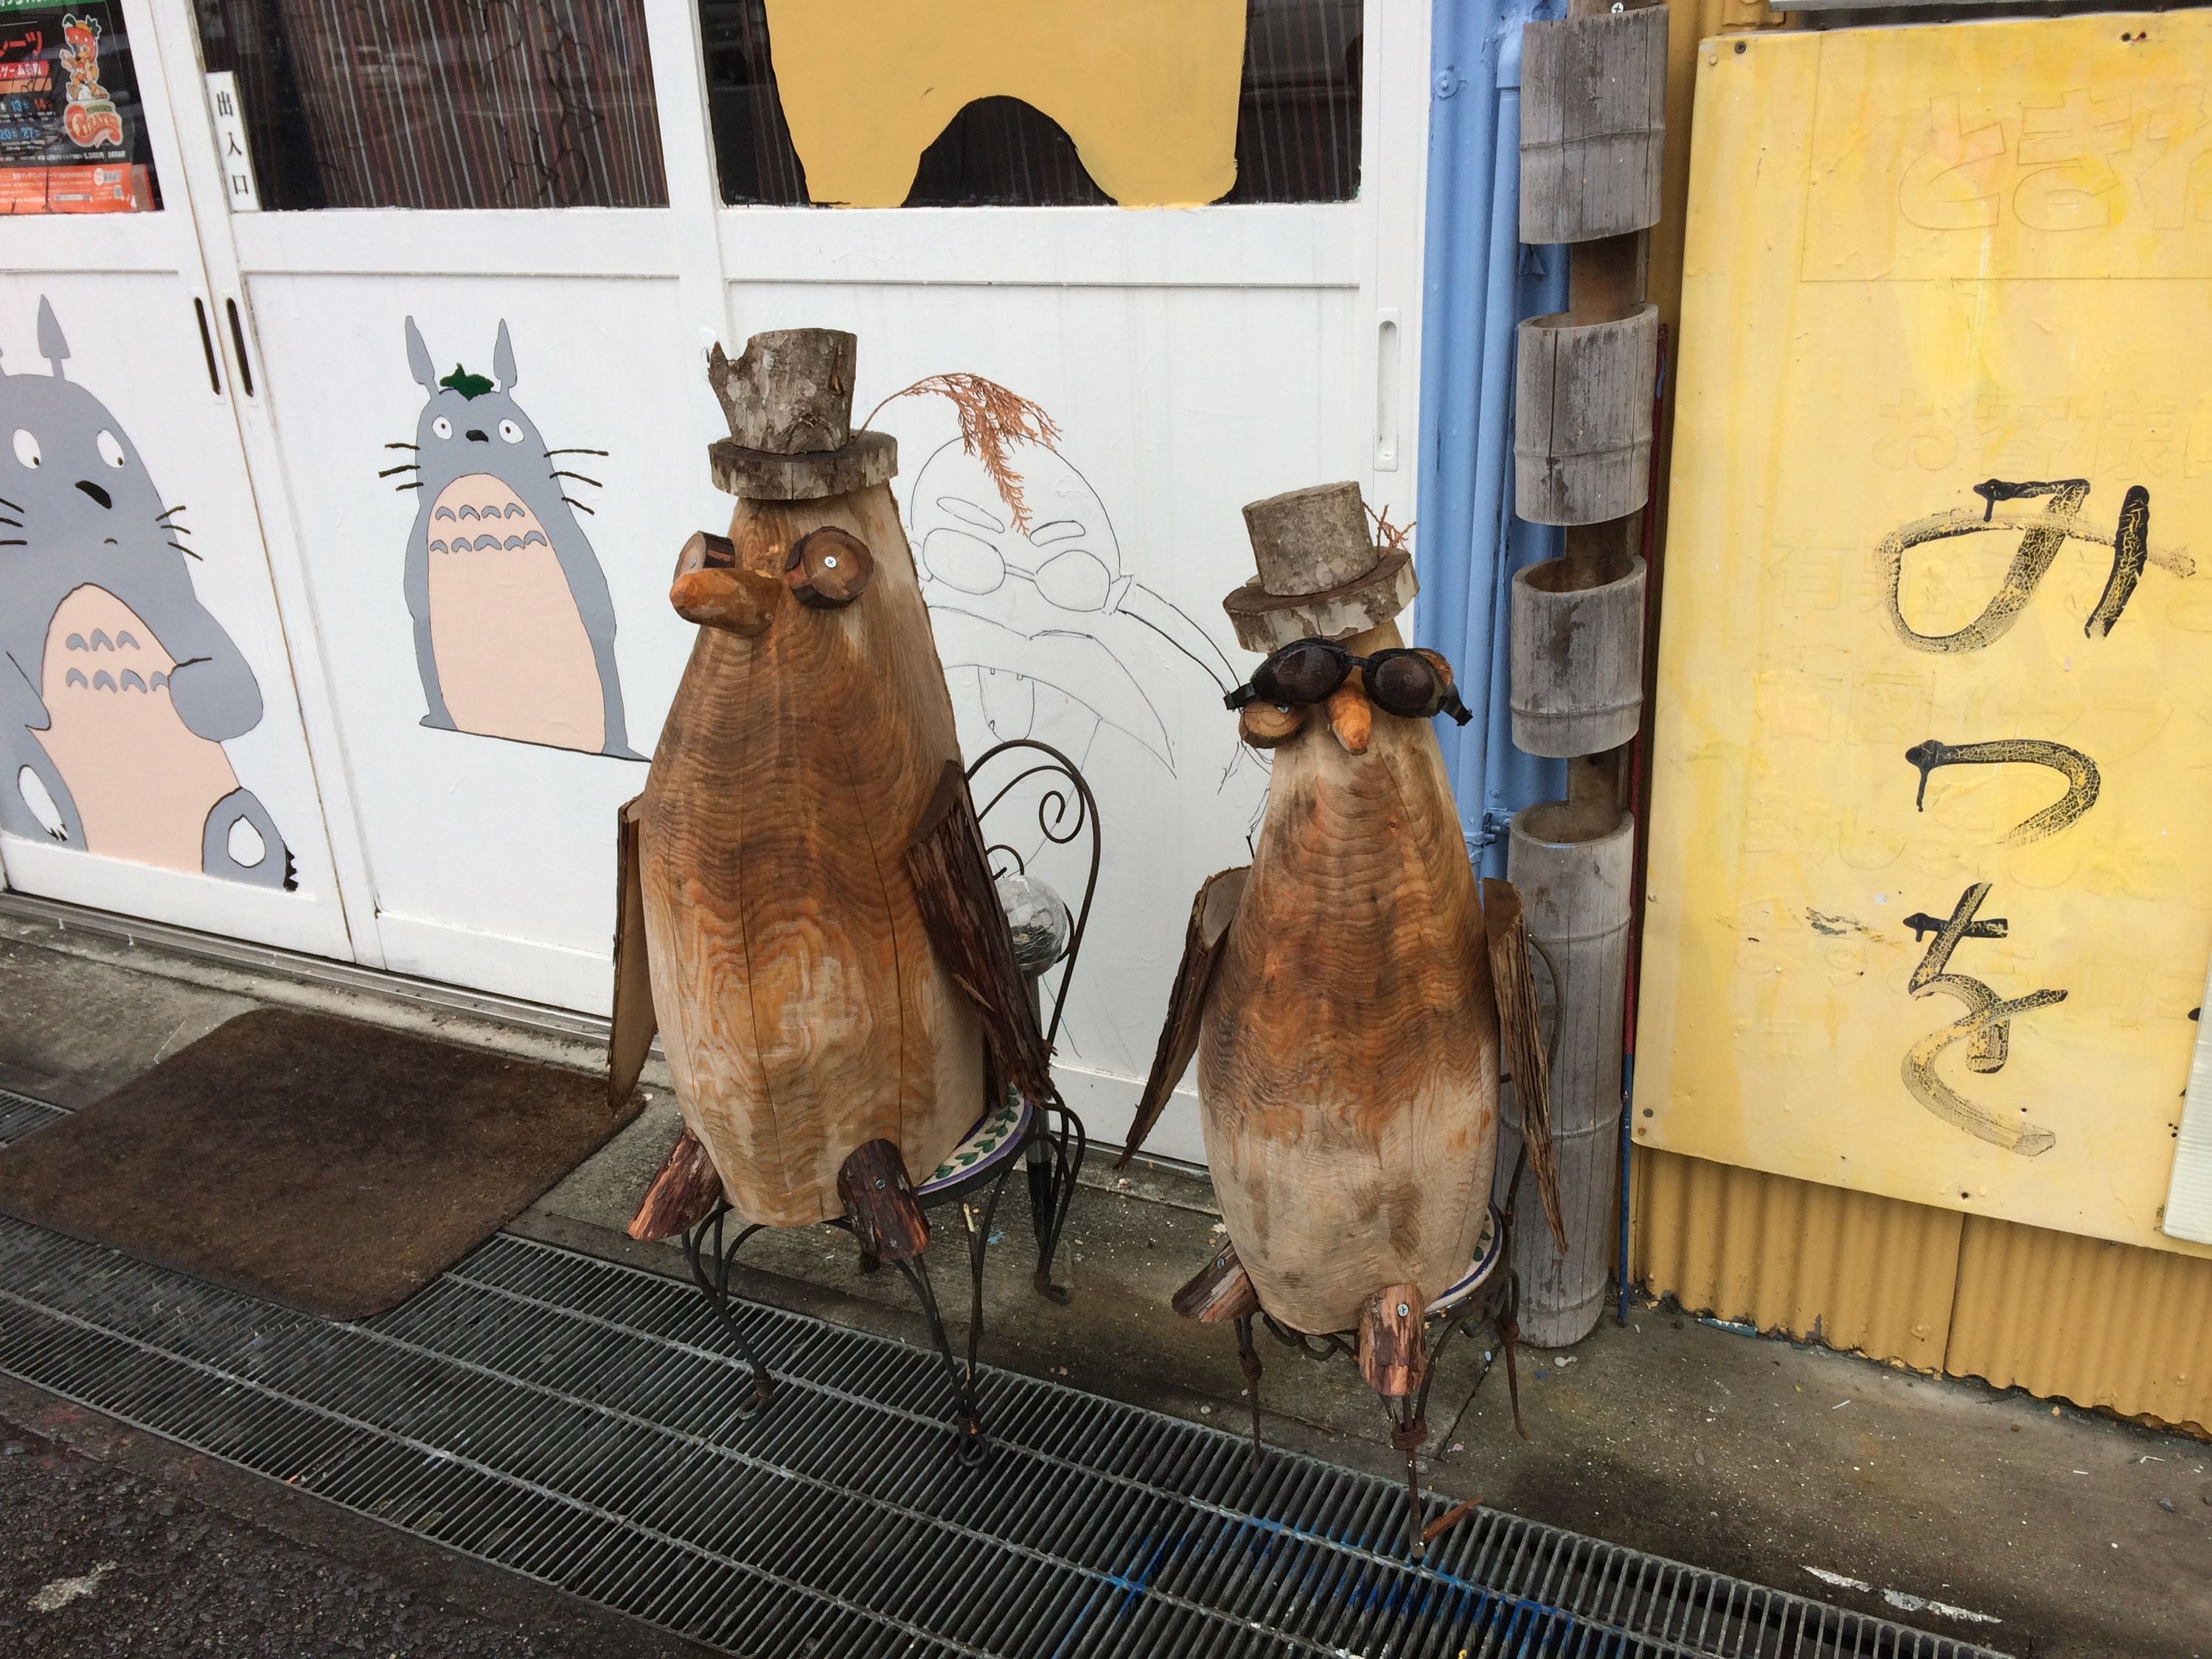 Two carved wooden birds in top hats, the female in sunglasses, sit on metal chairs outside a shop.